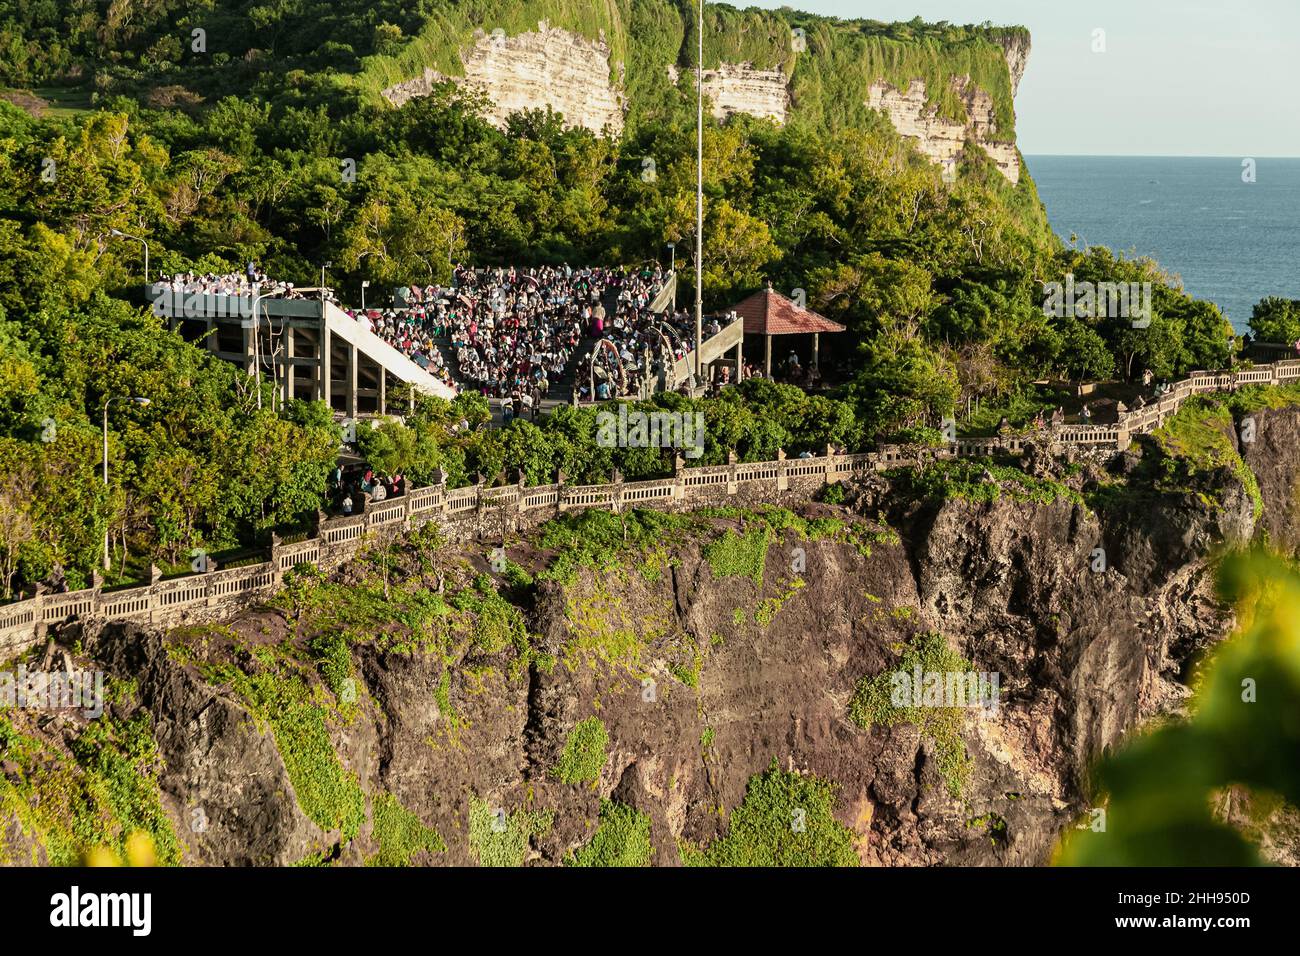 BALI, INDONESIA - MARCH 1, 2014: Big number of spectators at the open-air amphitheater Stock Photo